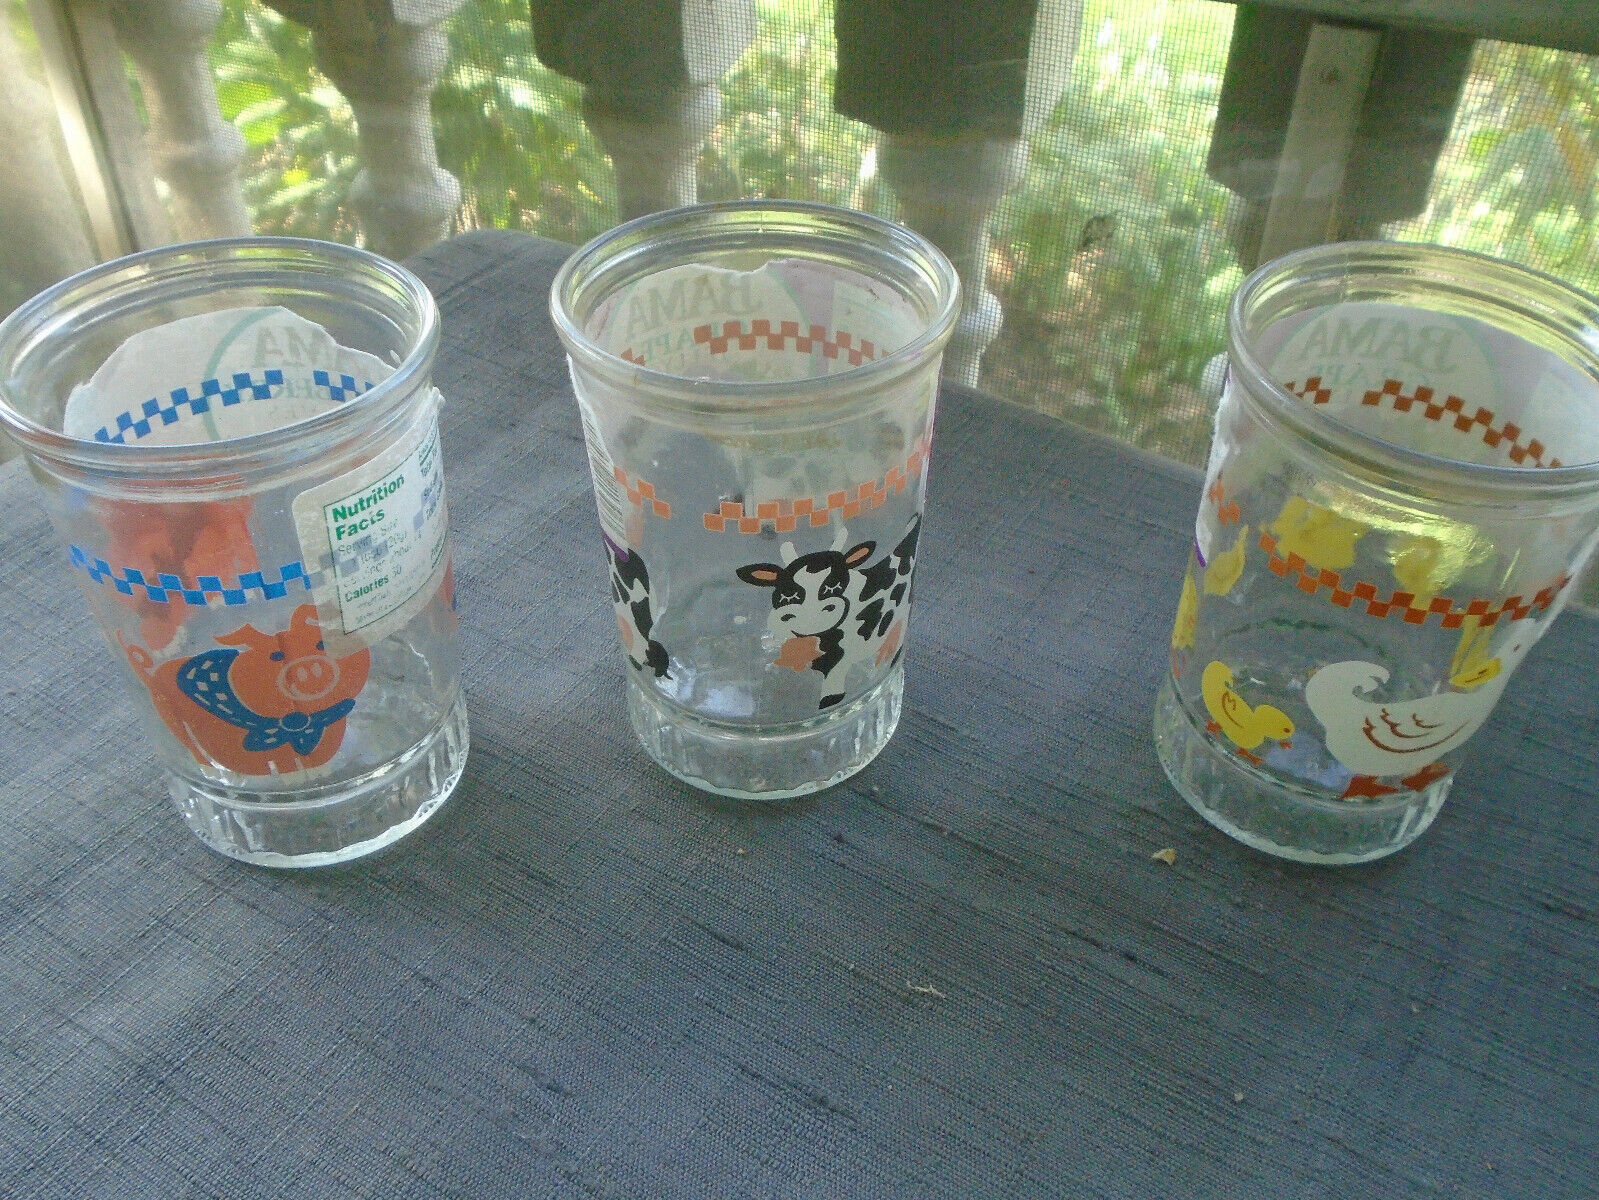 VTG BAMA Lot of 3 Jelly Jar Juice Glass 4”  Cow - Pig & Duck family